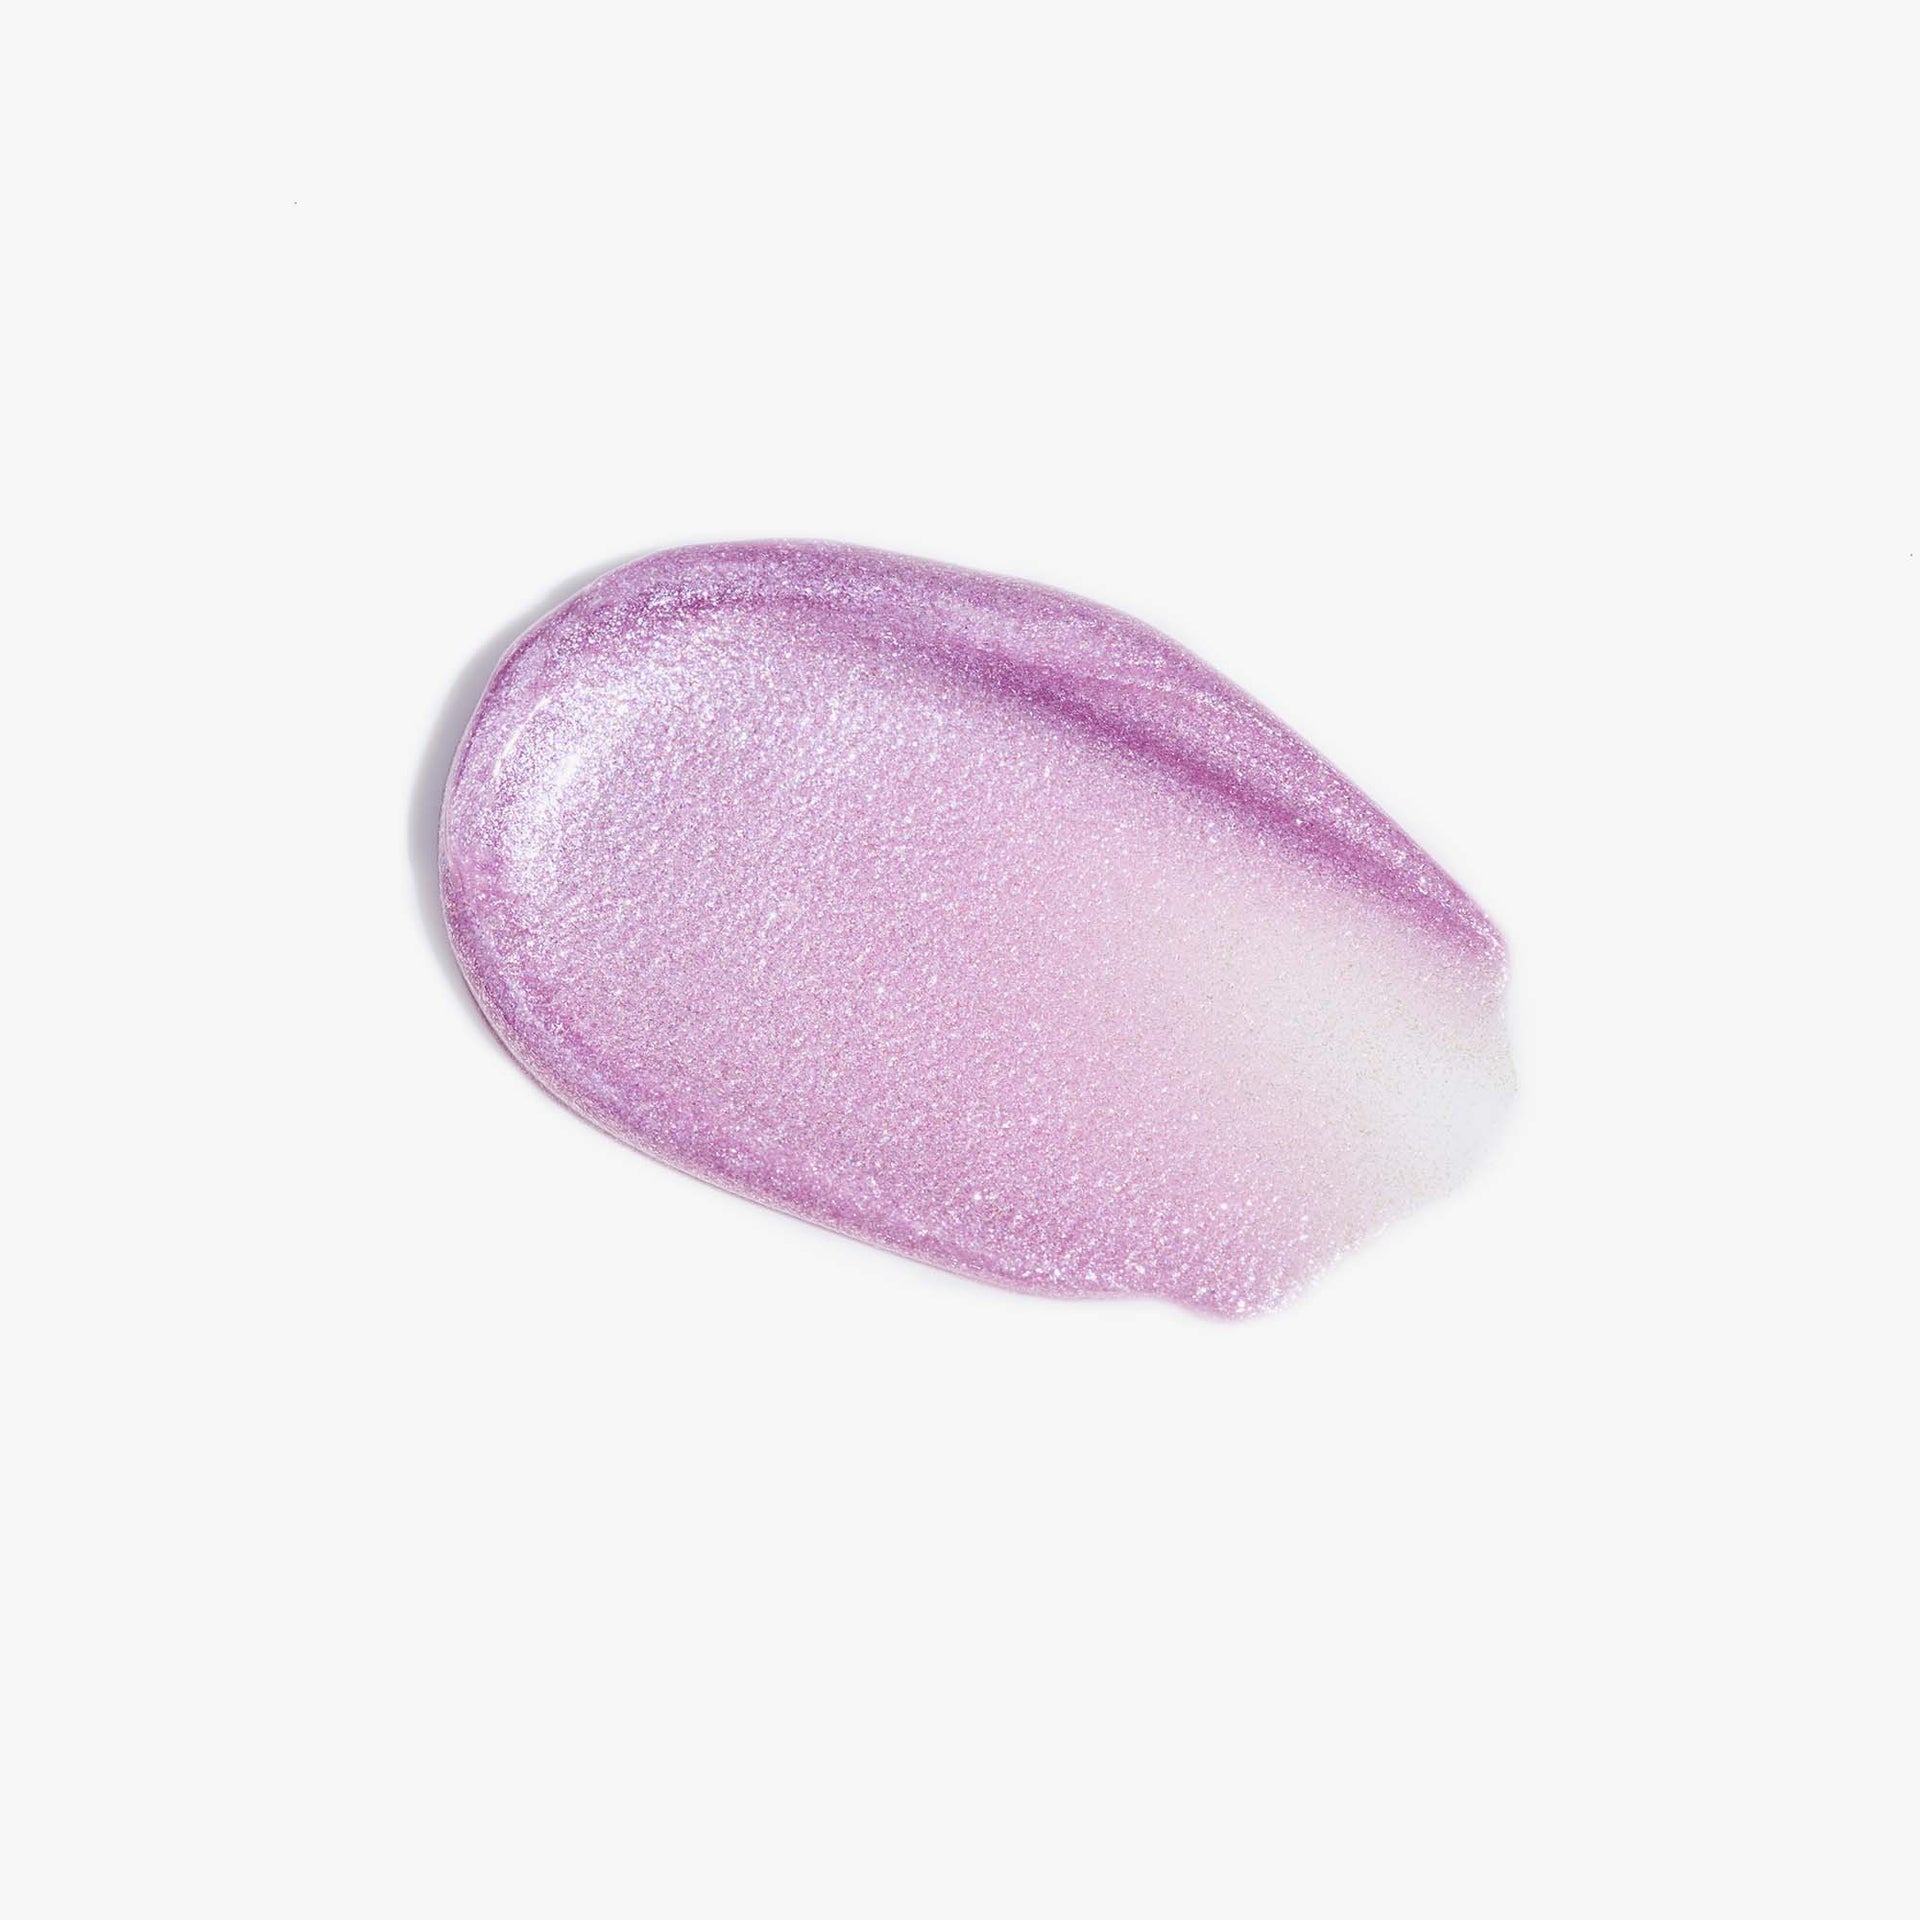 Galaxy | Cosmic Collection Ethereal Eye Gloss Swatch - Galaxy 